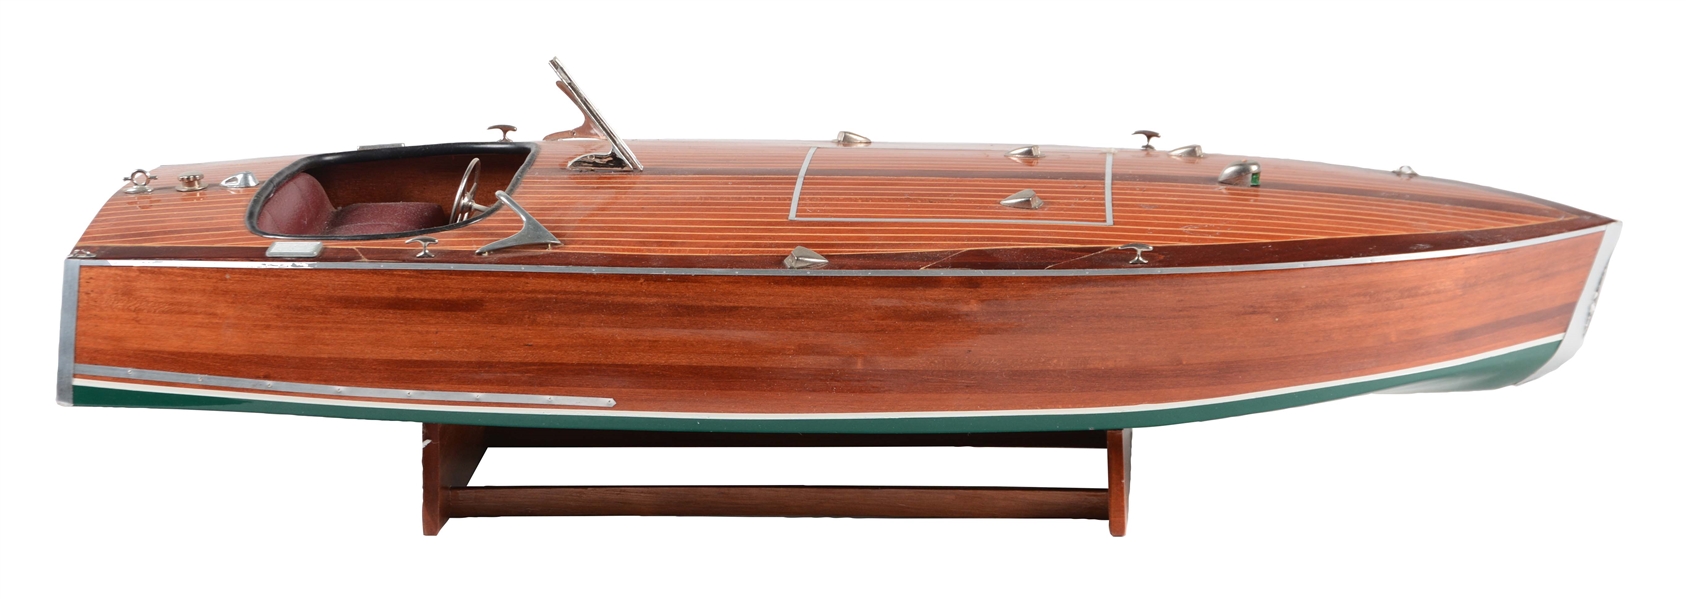 WOOD RACING BOAT ON STAND.